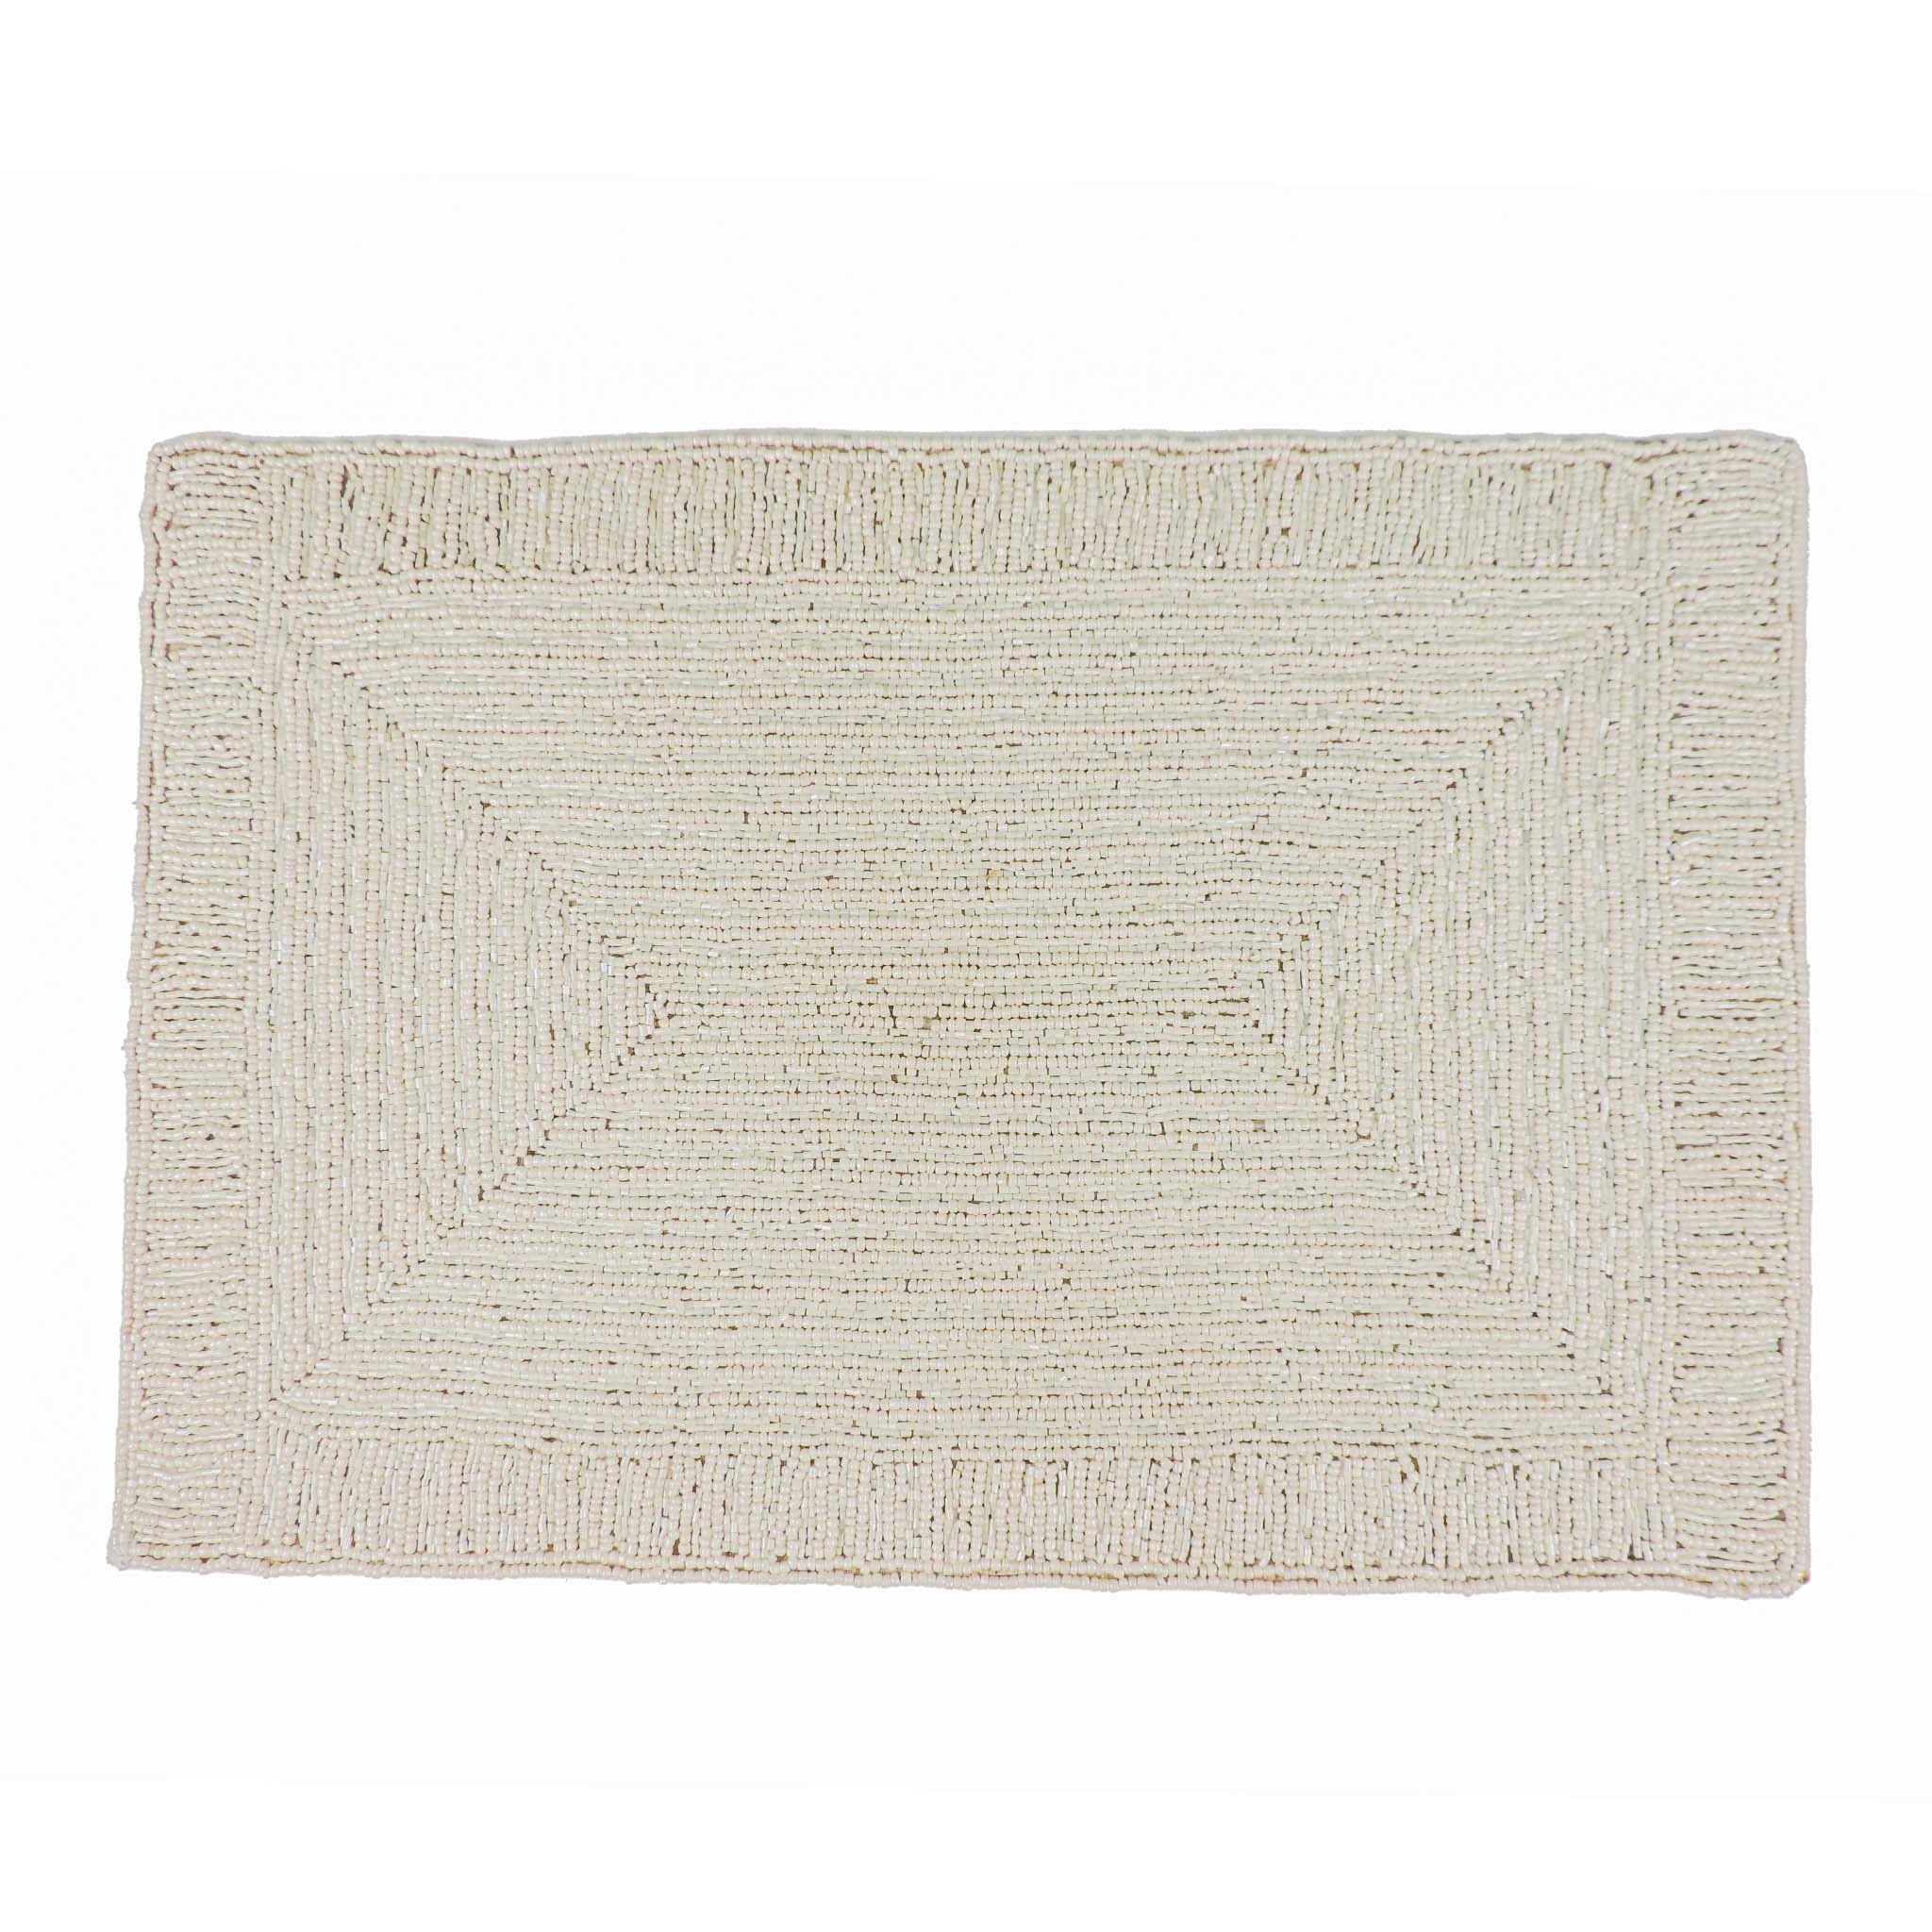 Glass Bead Embroidered Placemat in Off-White, Set of 2